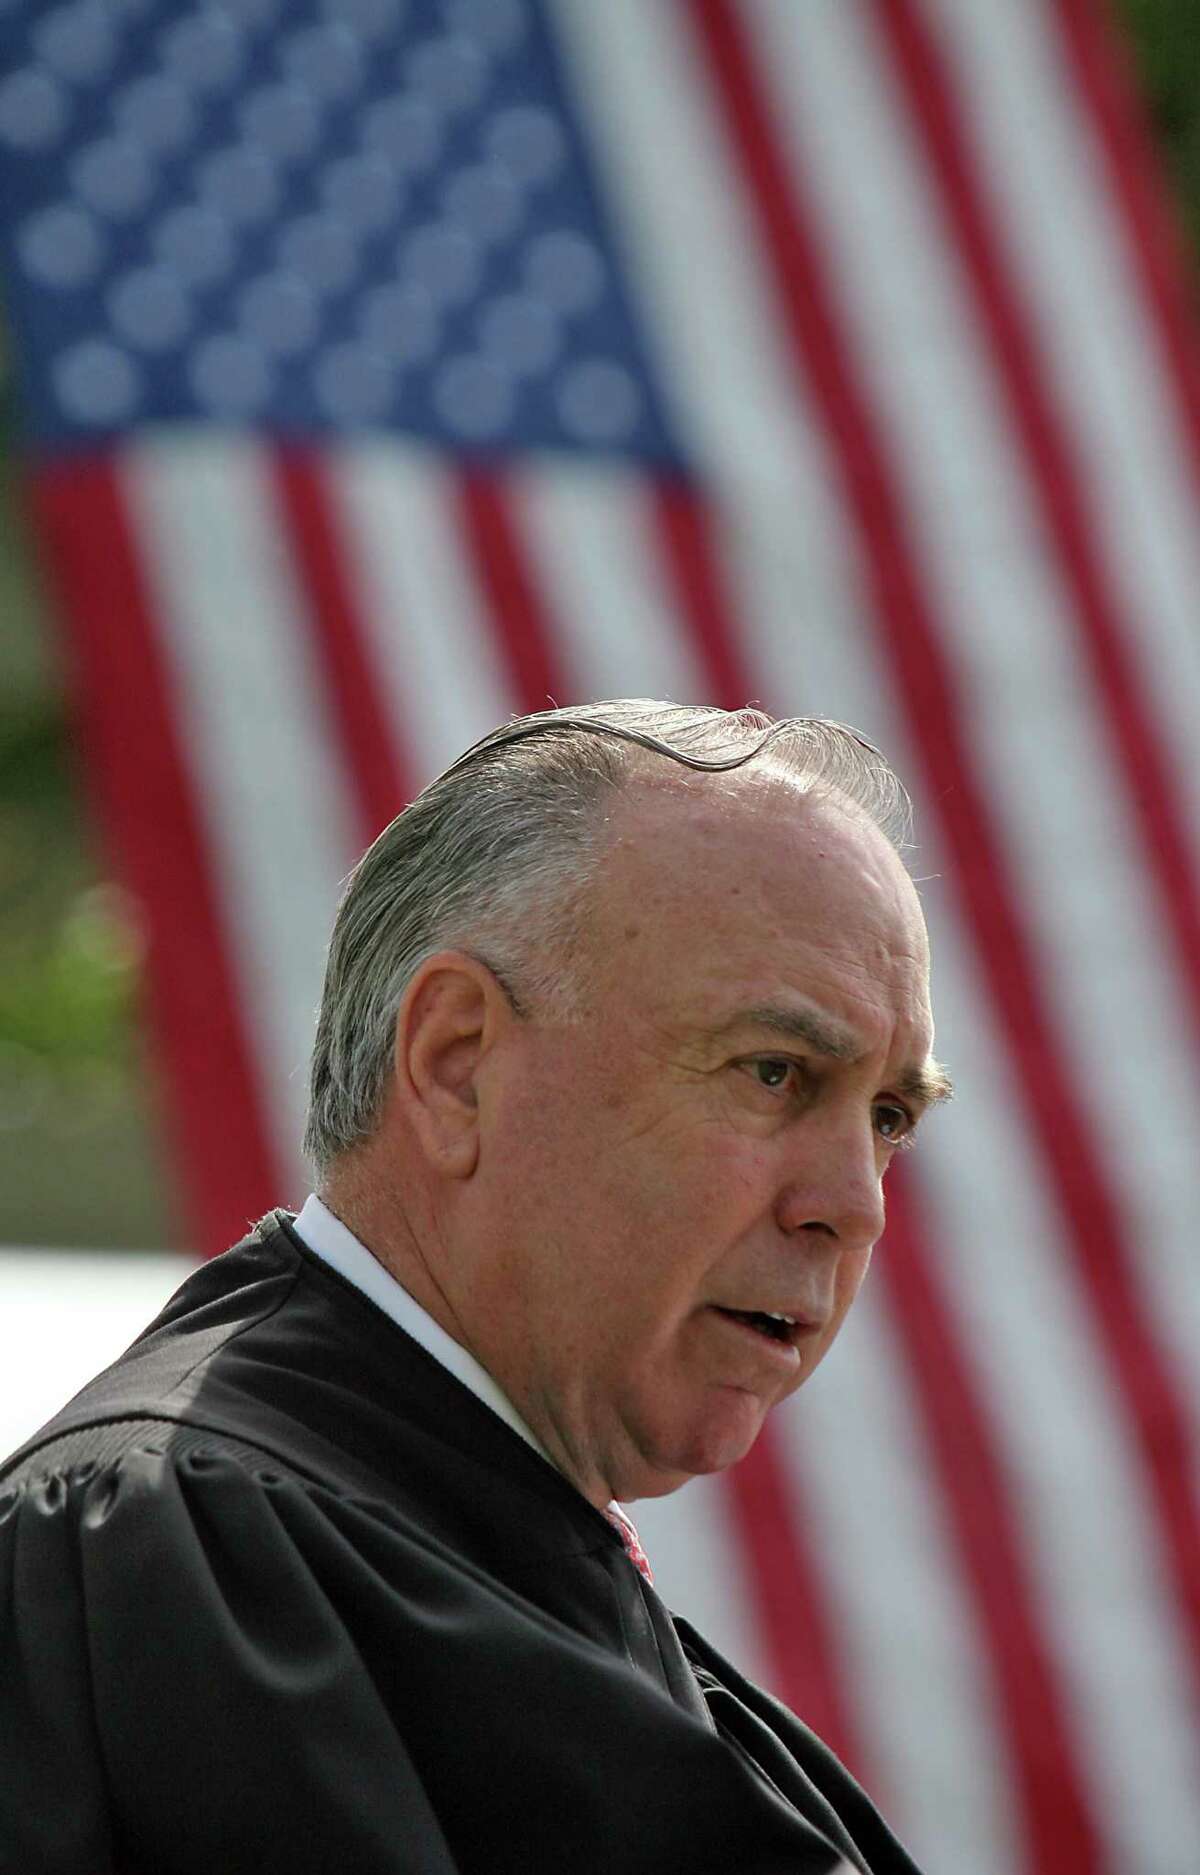 Judge T.S. Ellis III presides over a 2008 naturalization ceremony at Arlington National Cemetery in Virginia.